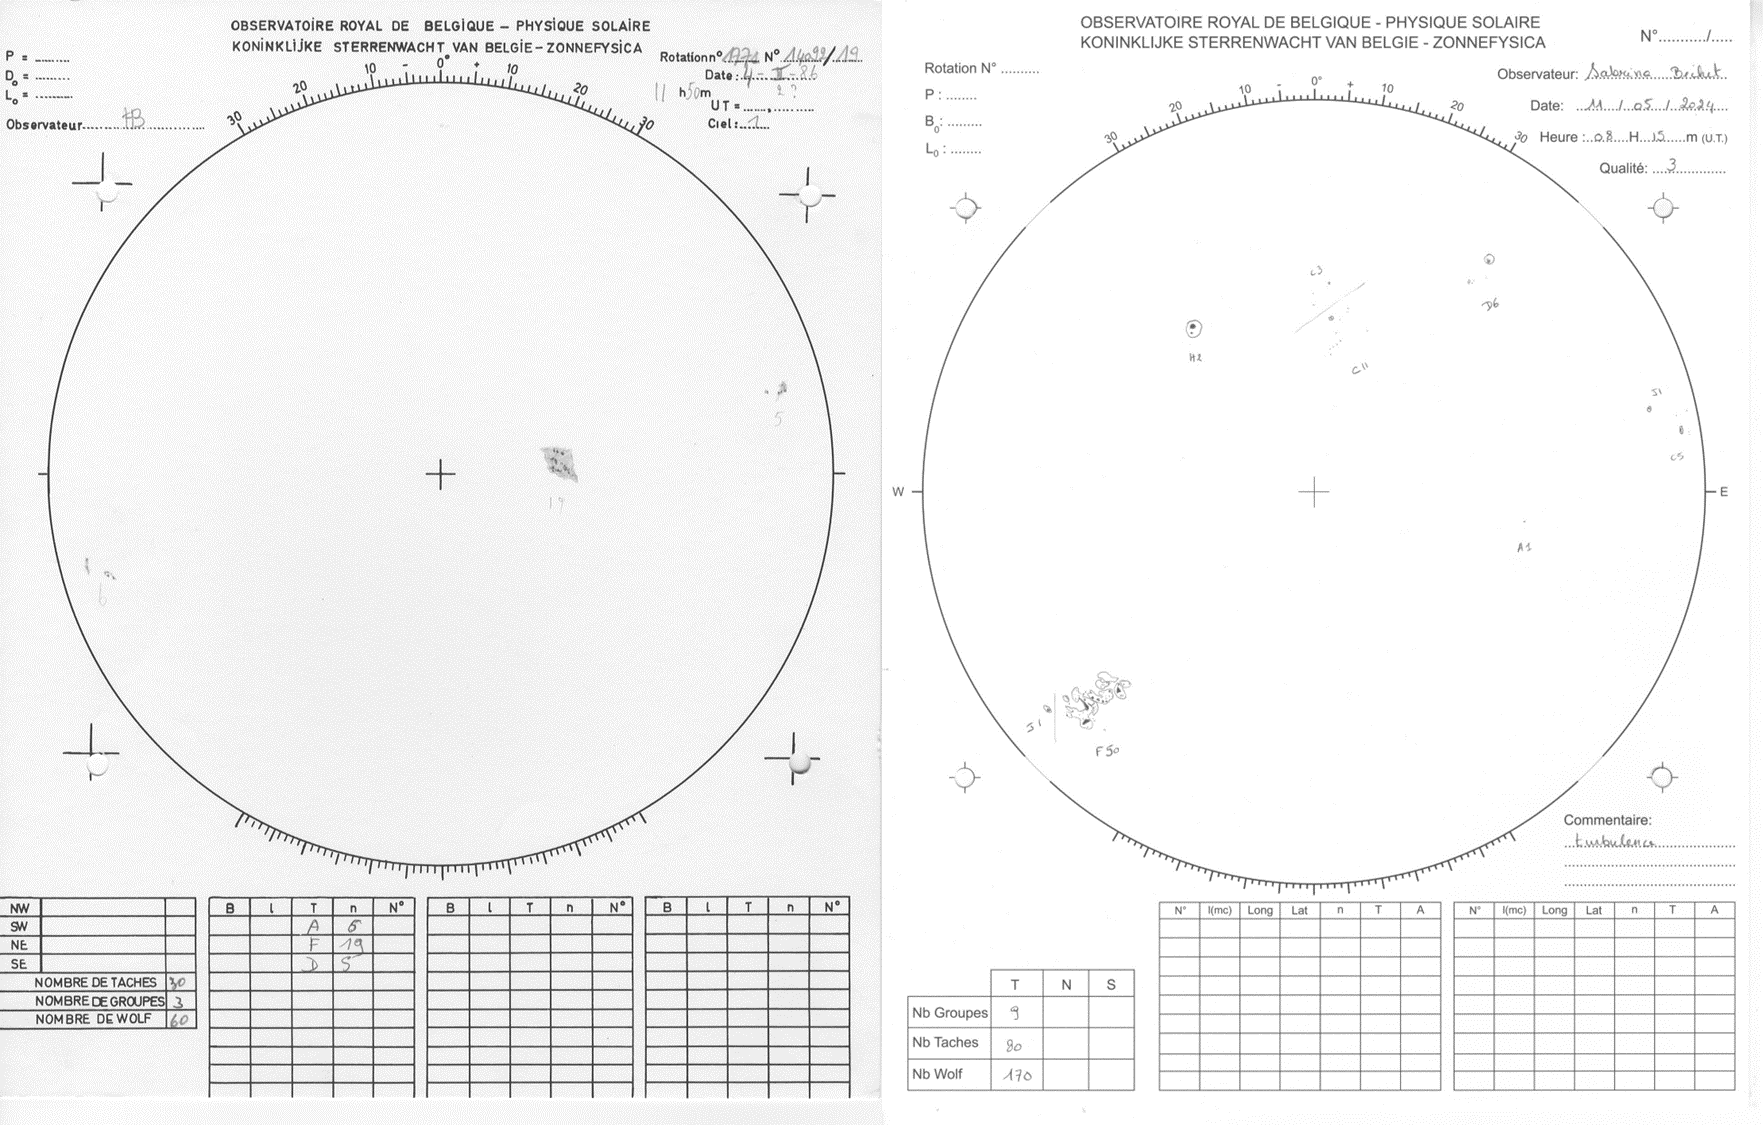 The solar drawings underneath were made by solar observers from SILSO on 4 February 1986 (left) and 11 May 2024 (right), when the sunspot numbers were resp. 66 and 162.